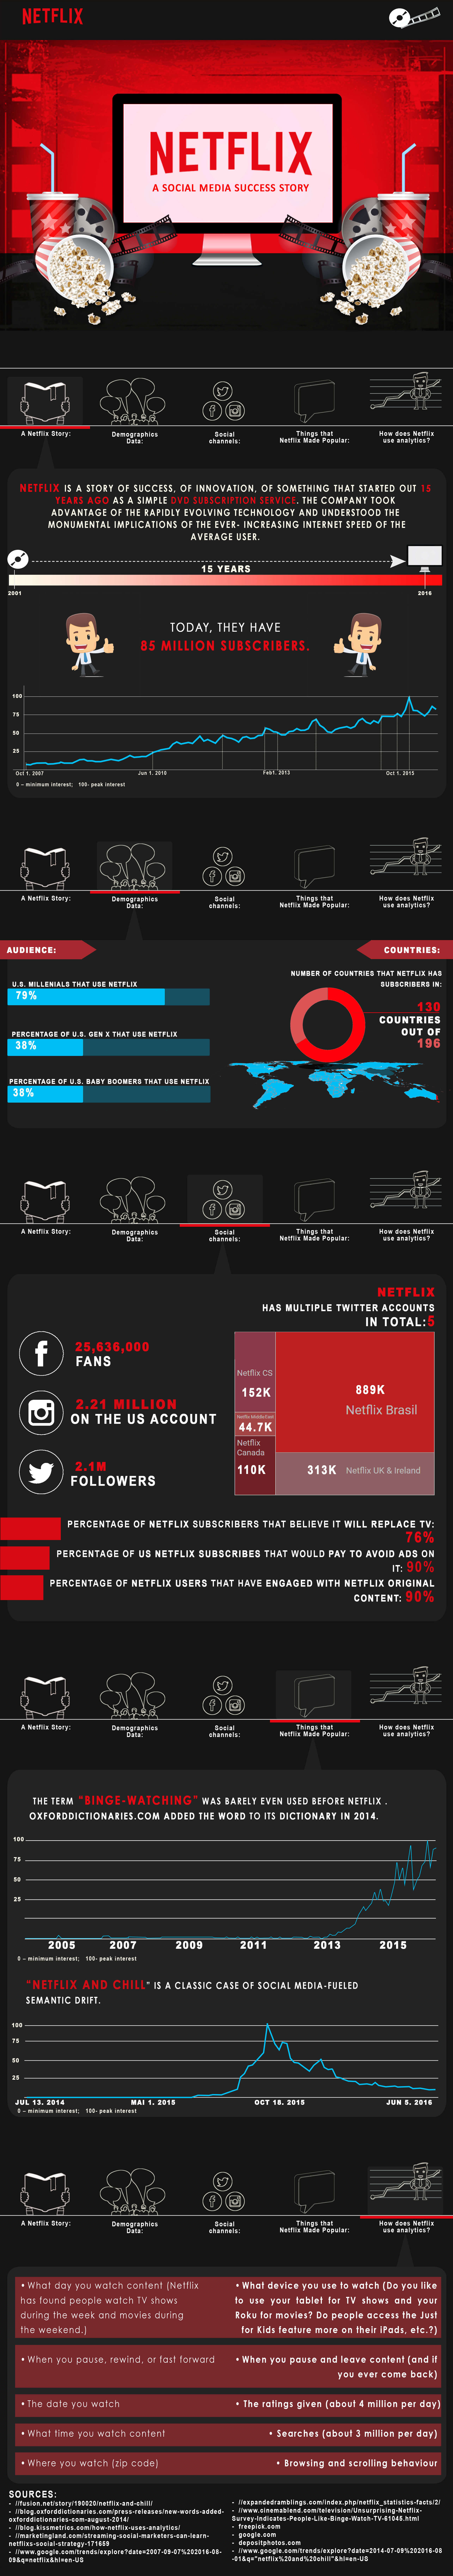 A Netflix Story: The Human Approach to Social Media Marketing [Infographic] | Social Media Today